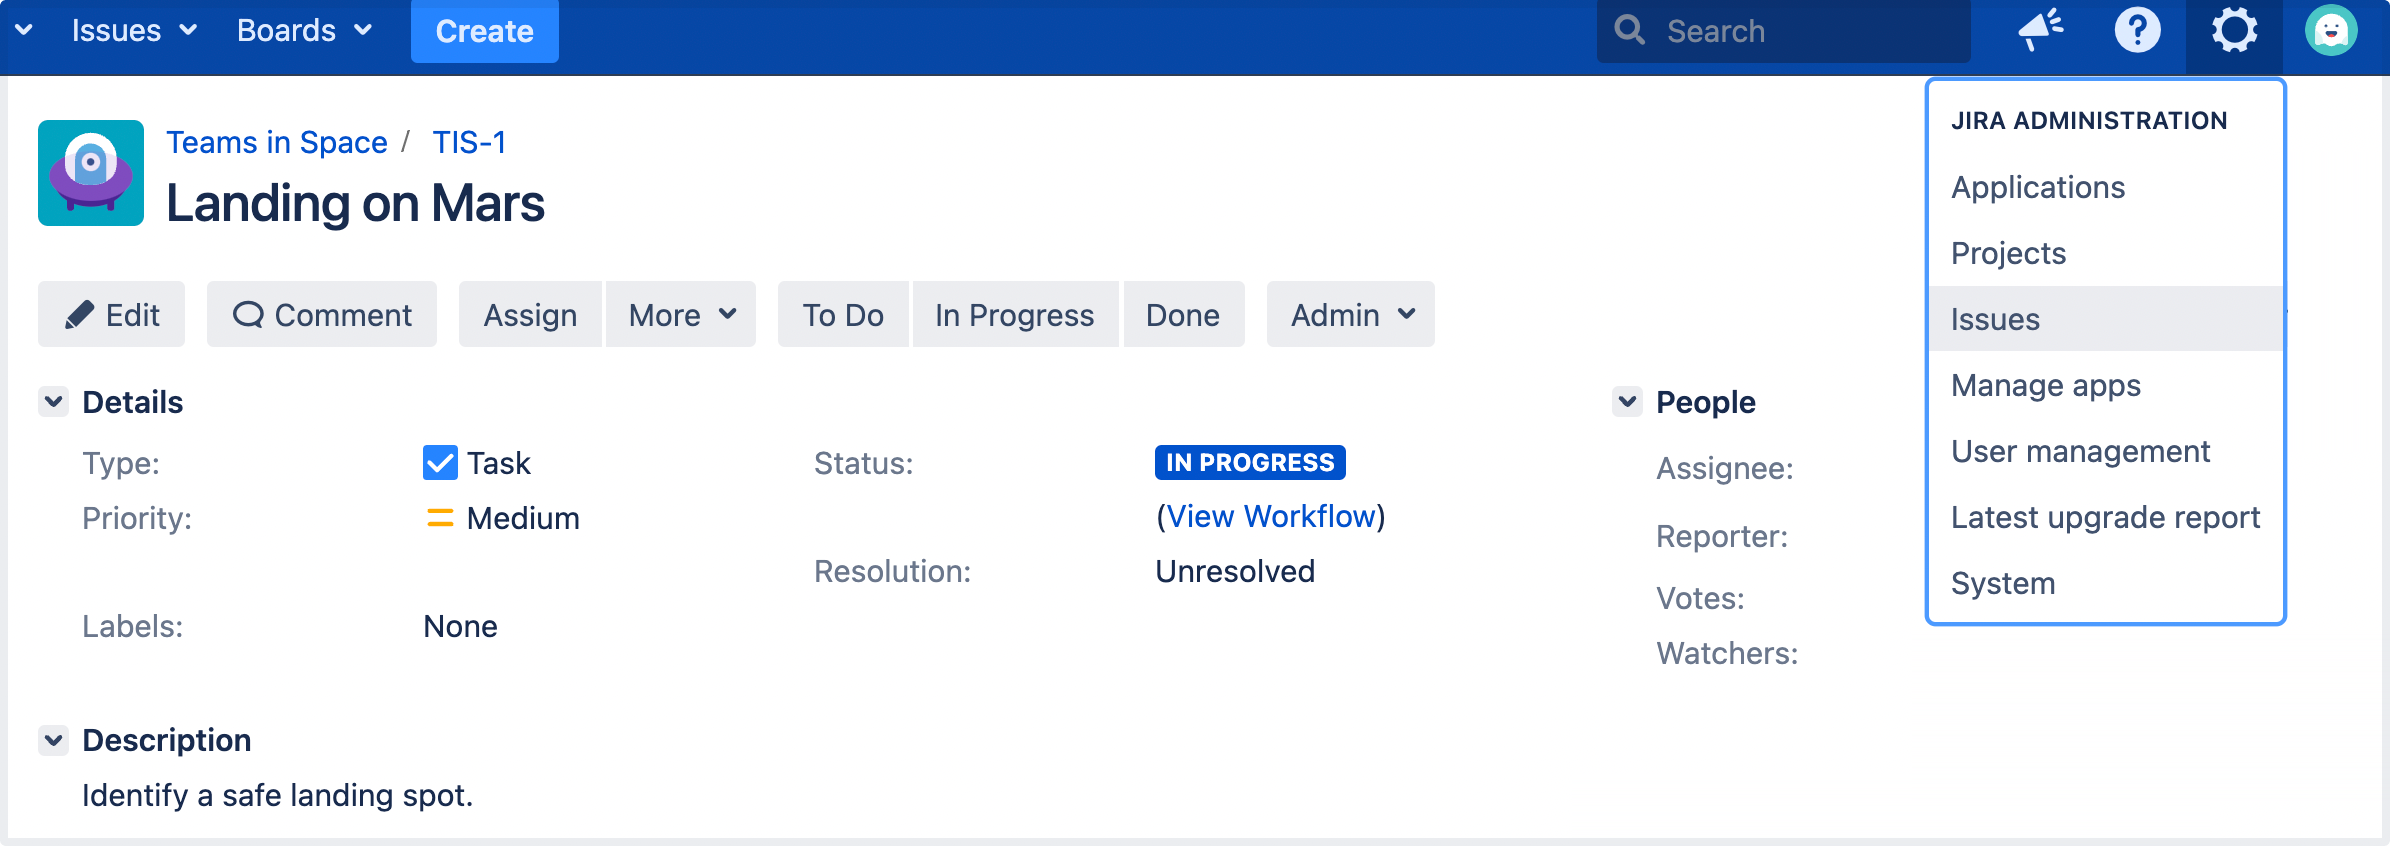 Working With Workflows Administering Jira Applications Data Center And Server 821 Atlassian 8211